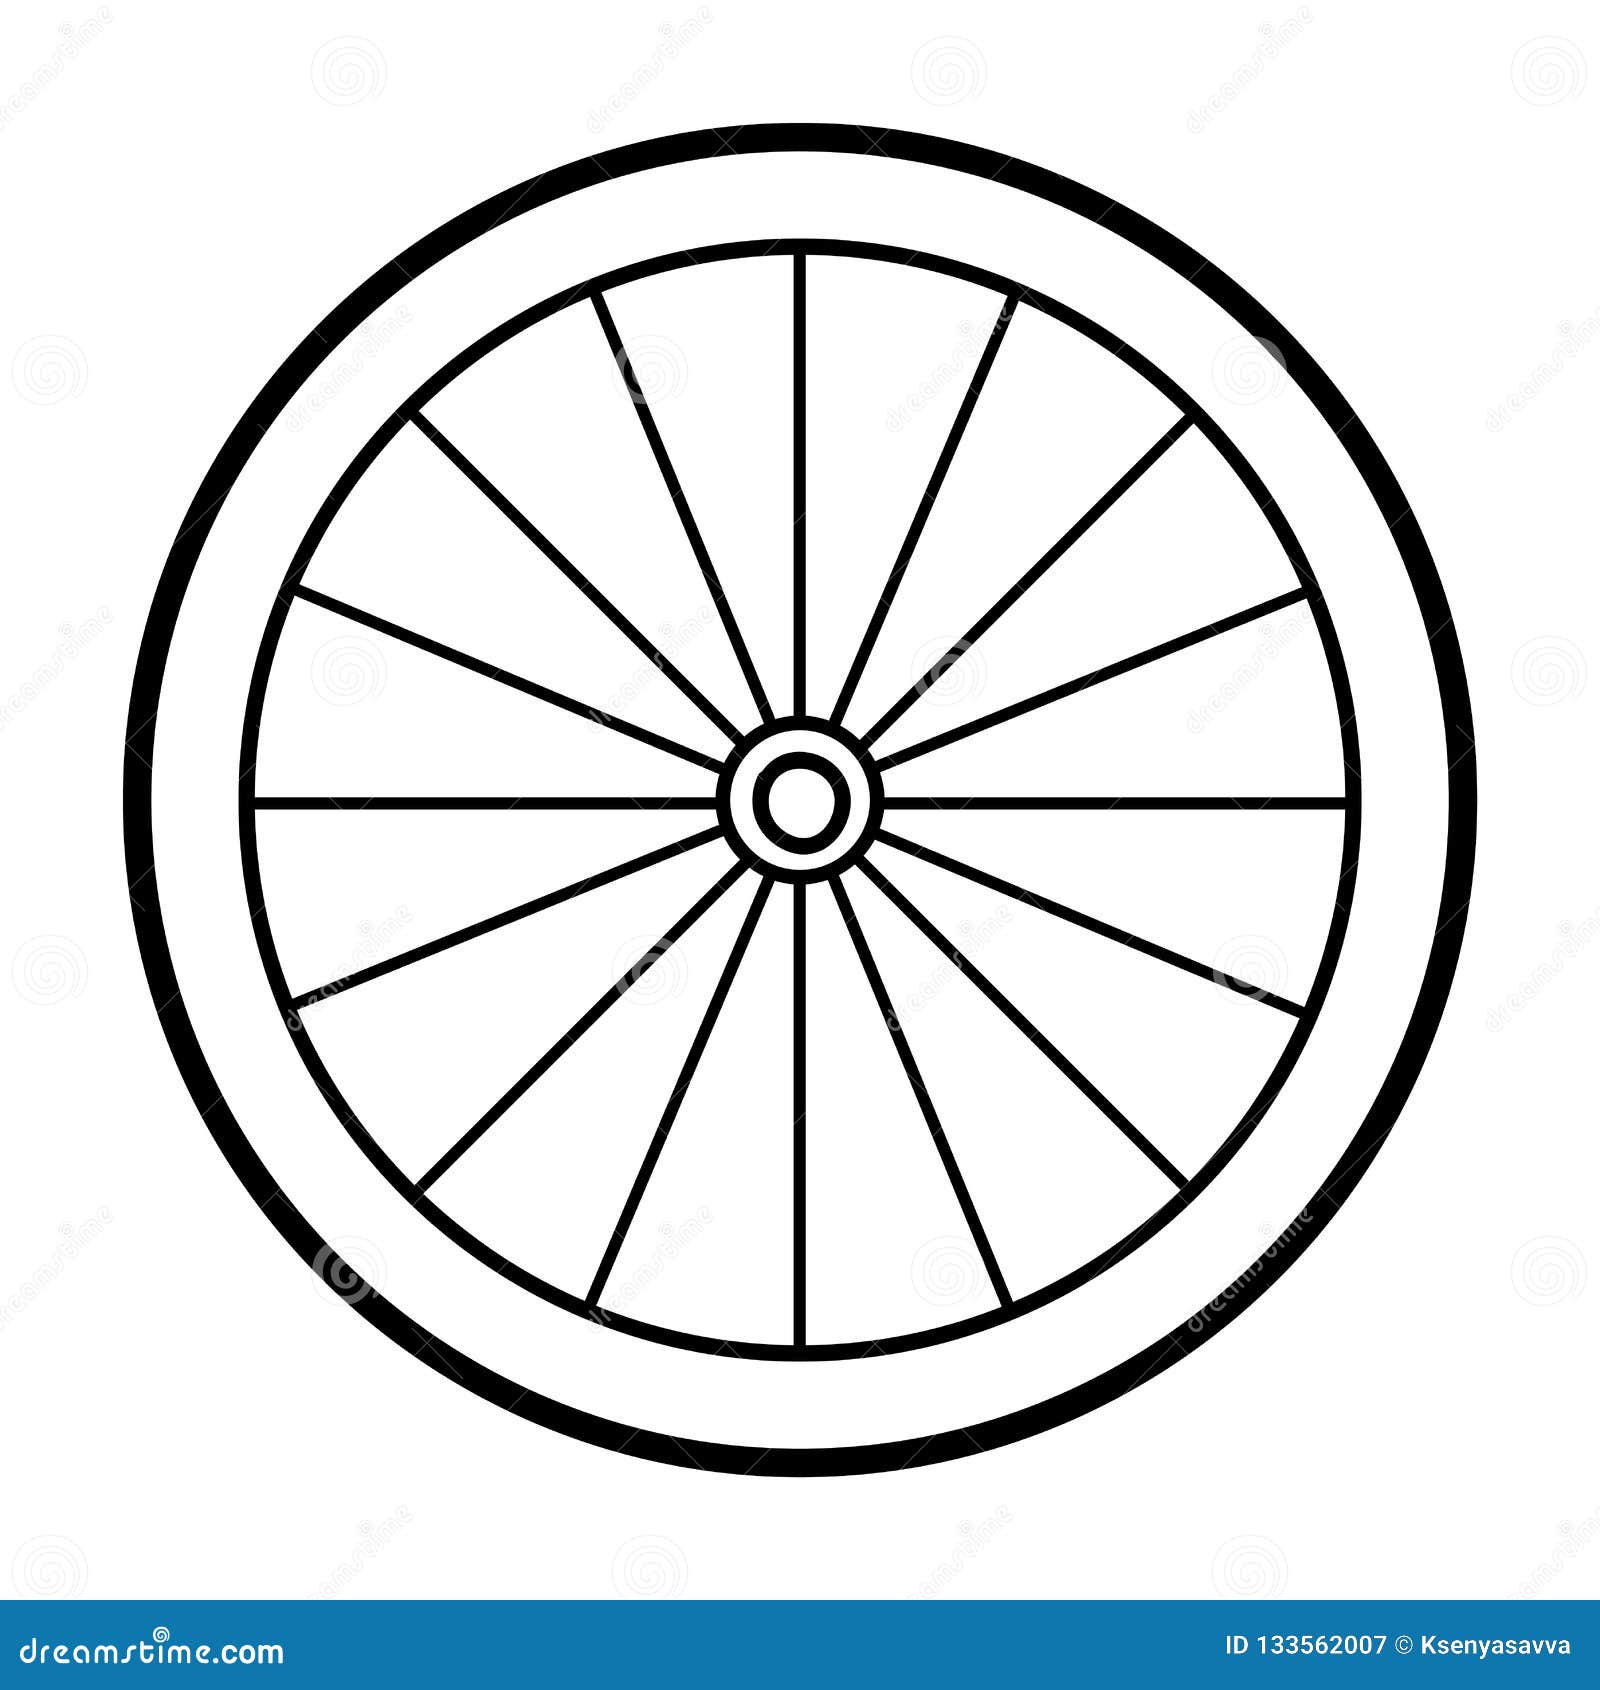 Coloring book bicycle wheel stock vector